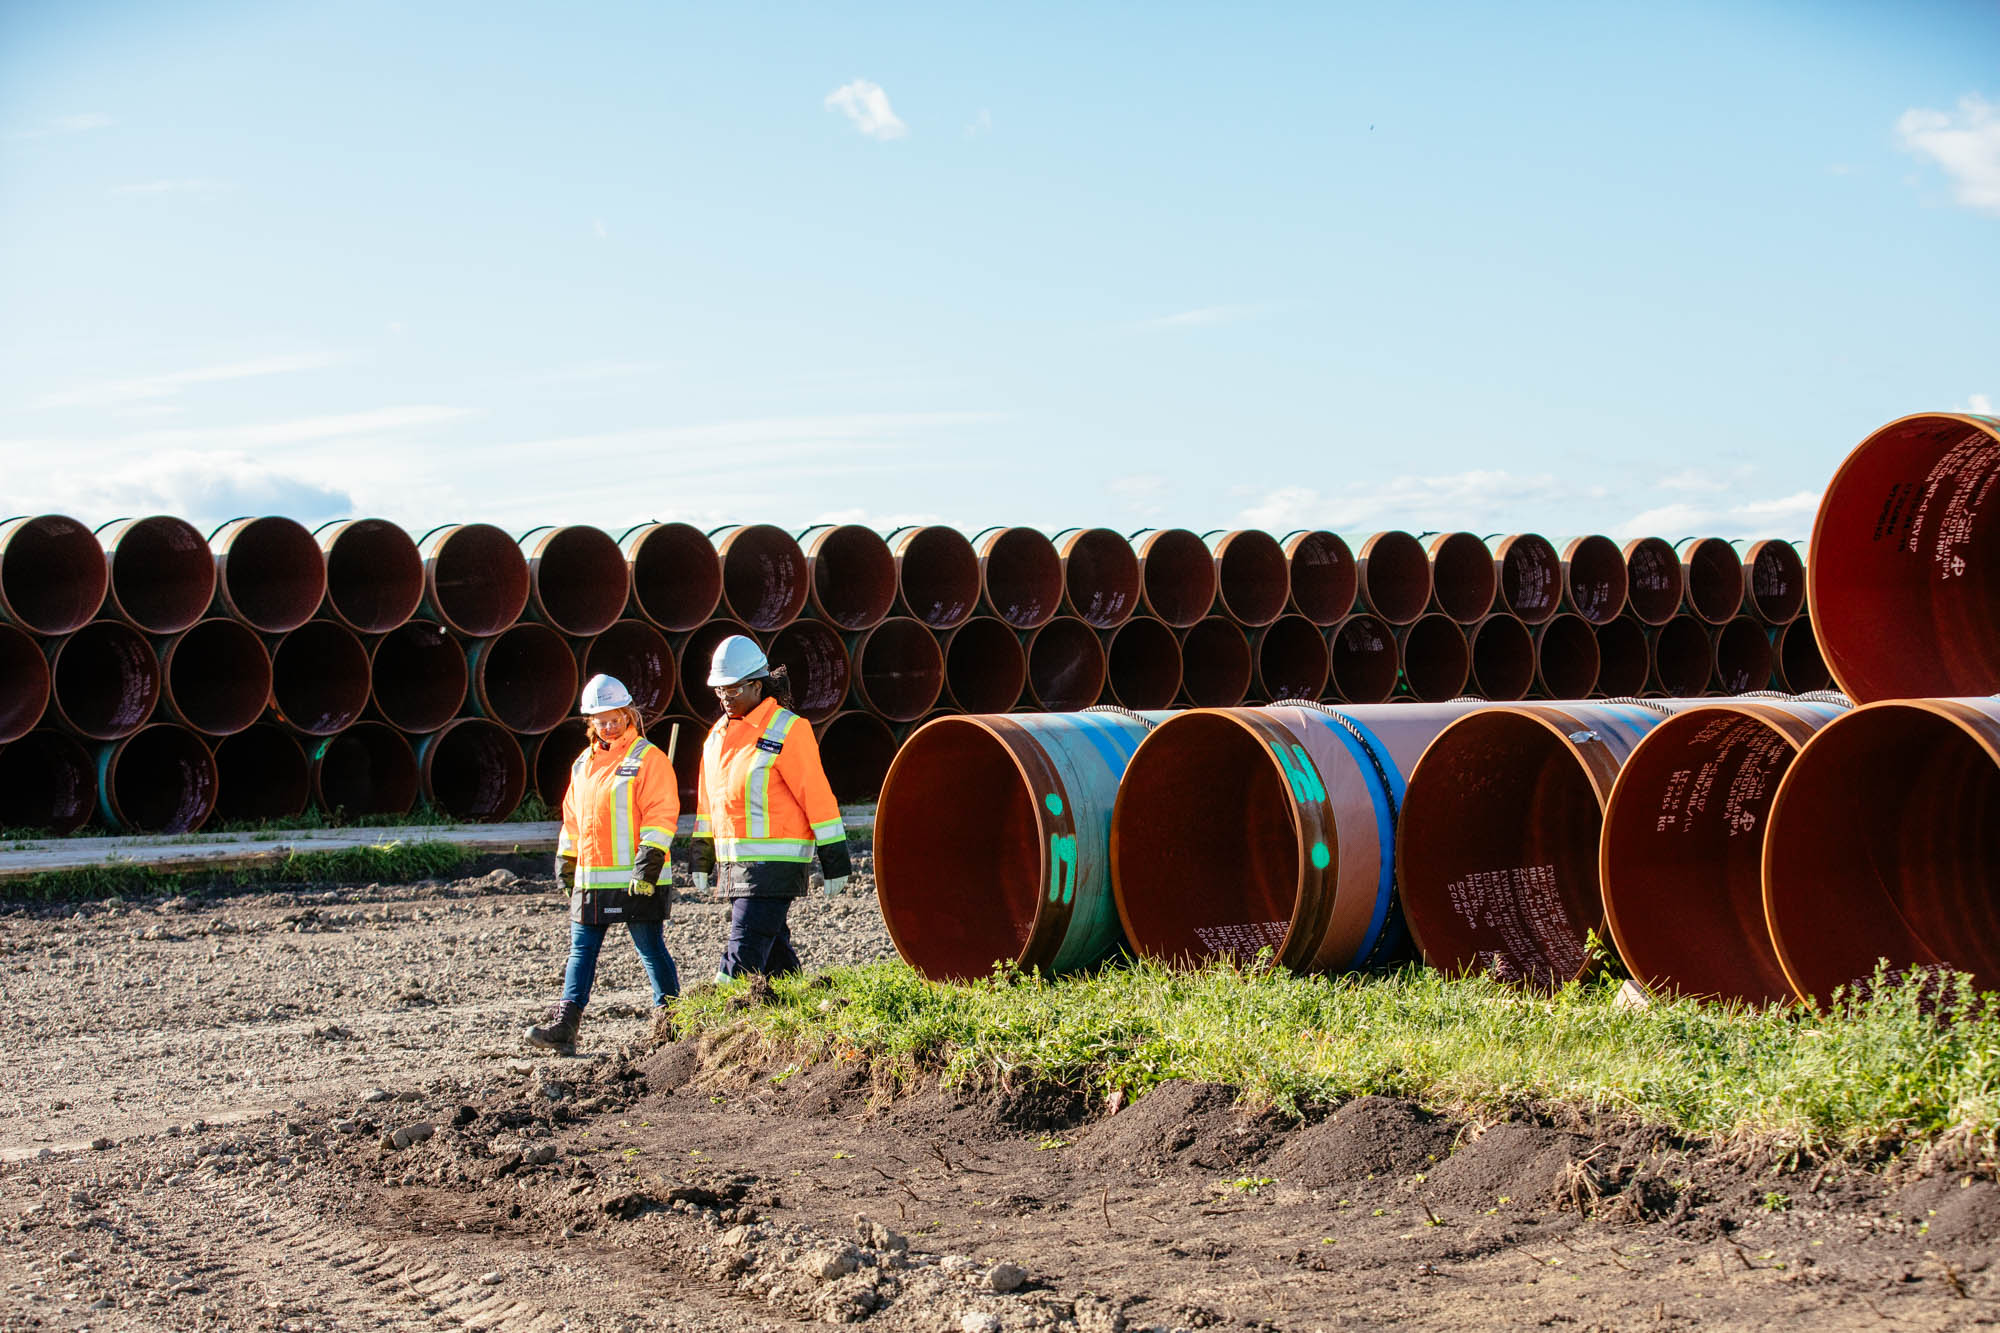 Two CER inspection officers walking through construction site with rows of unused pipes.